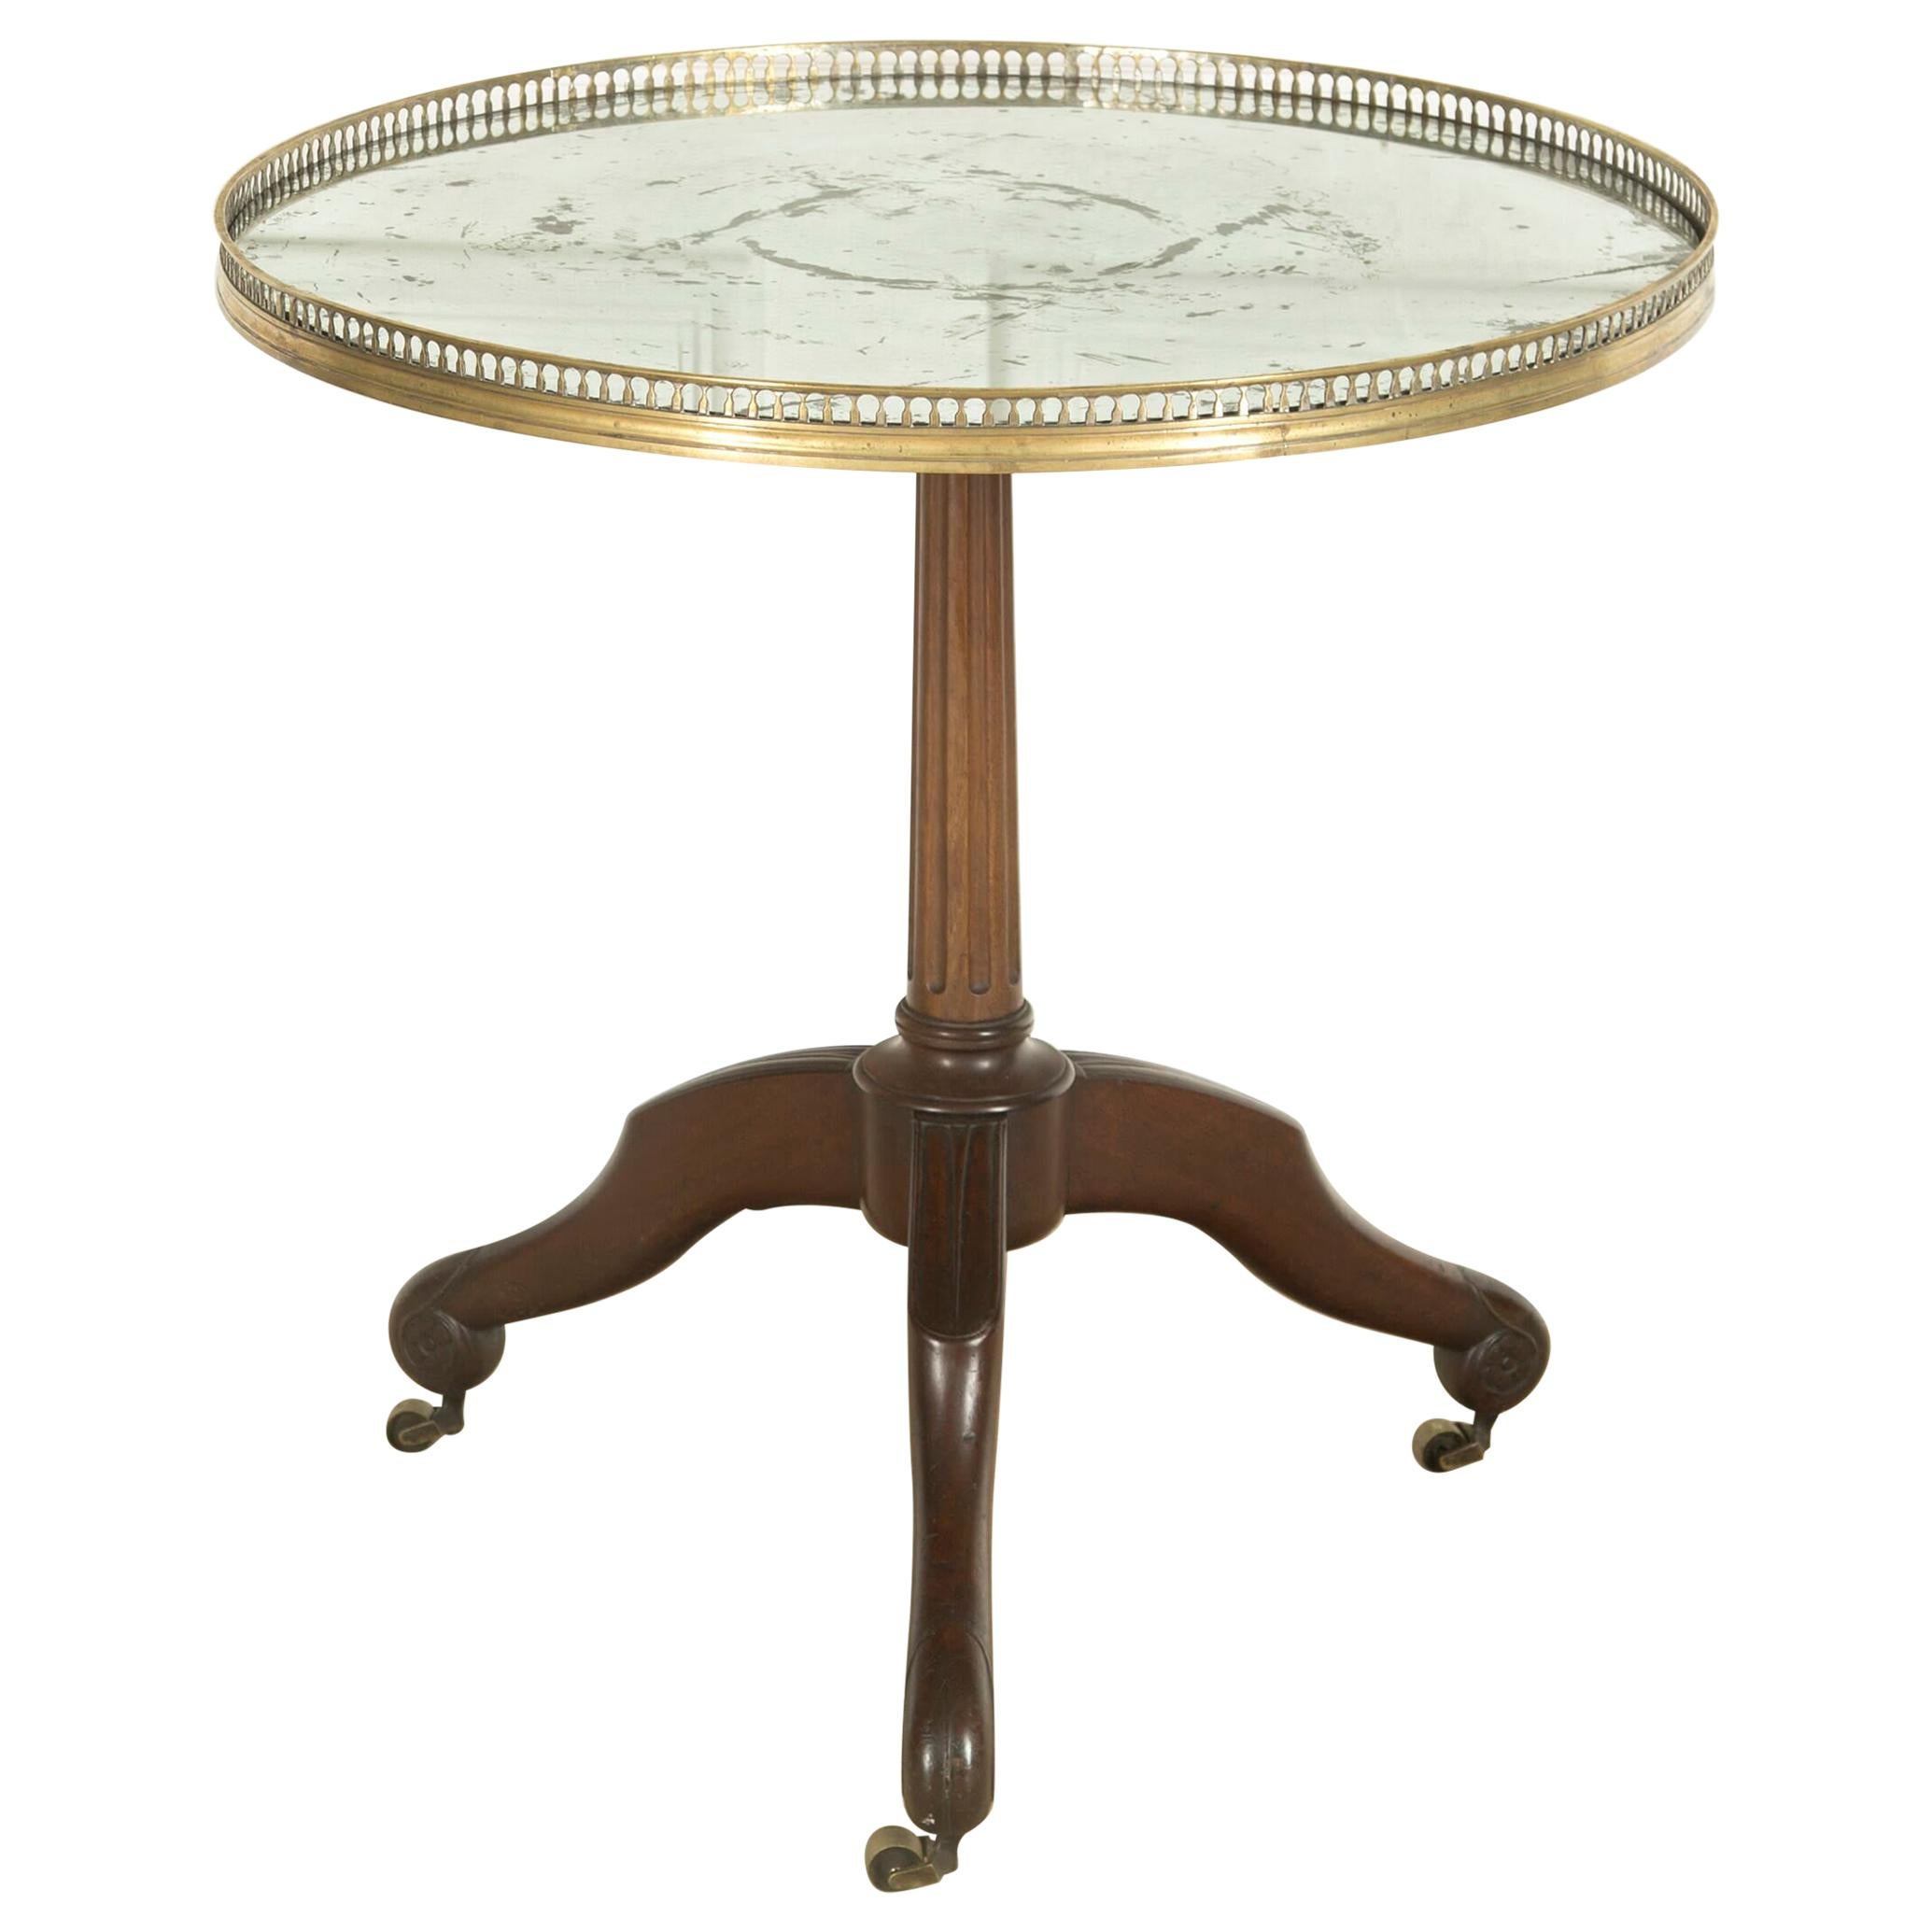 French Centre Table with Mirror Top and Brass Gallery